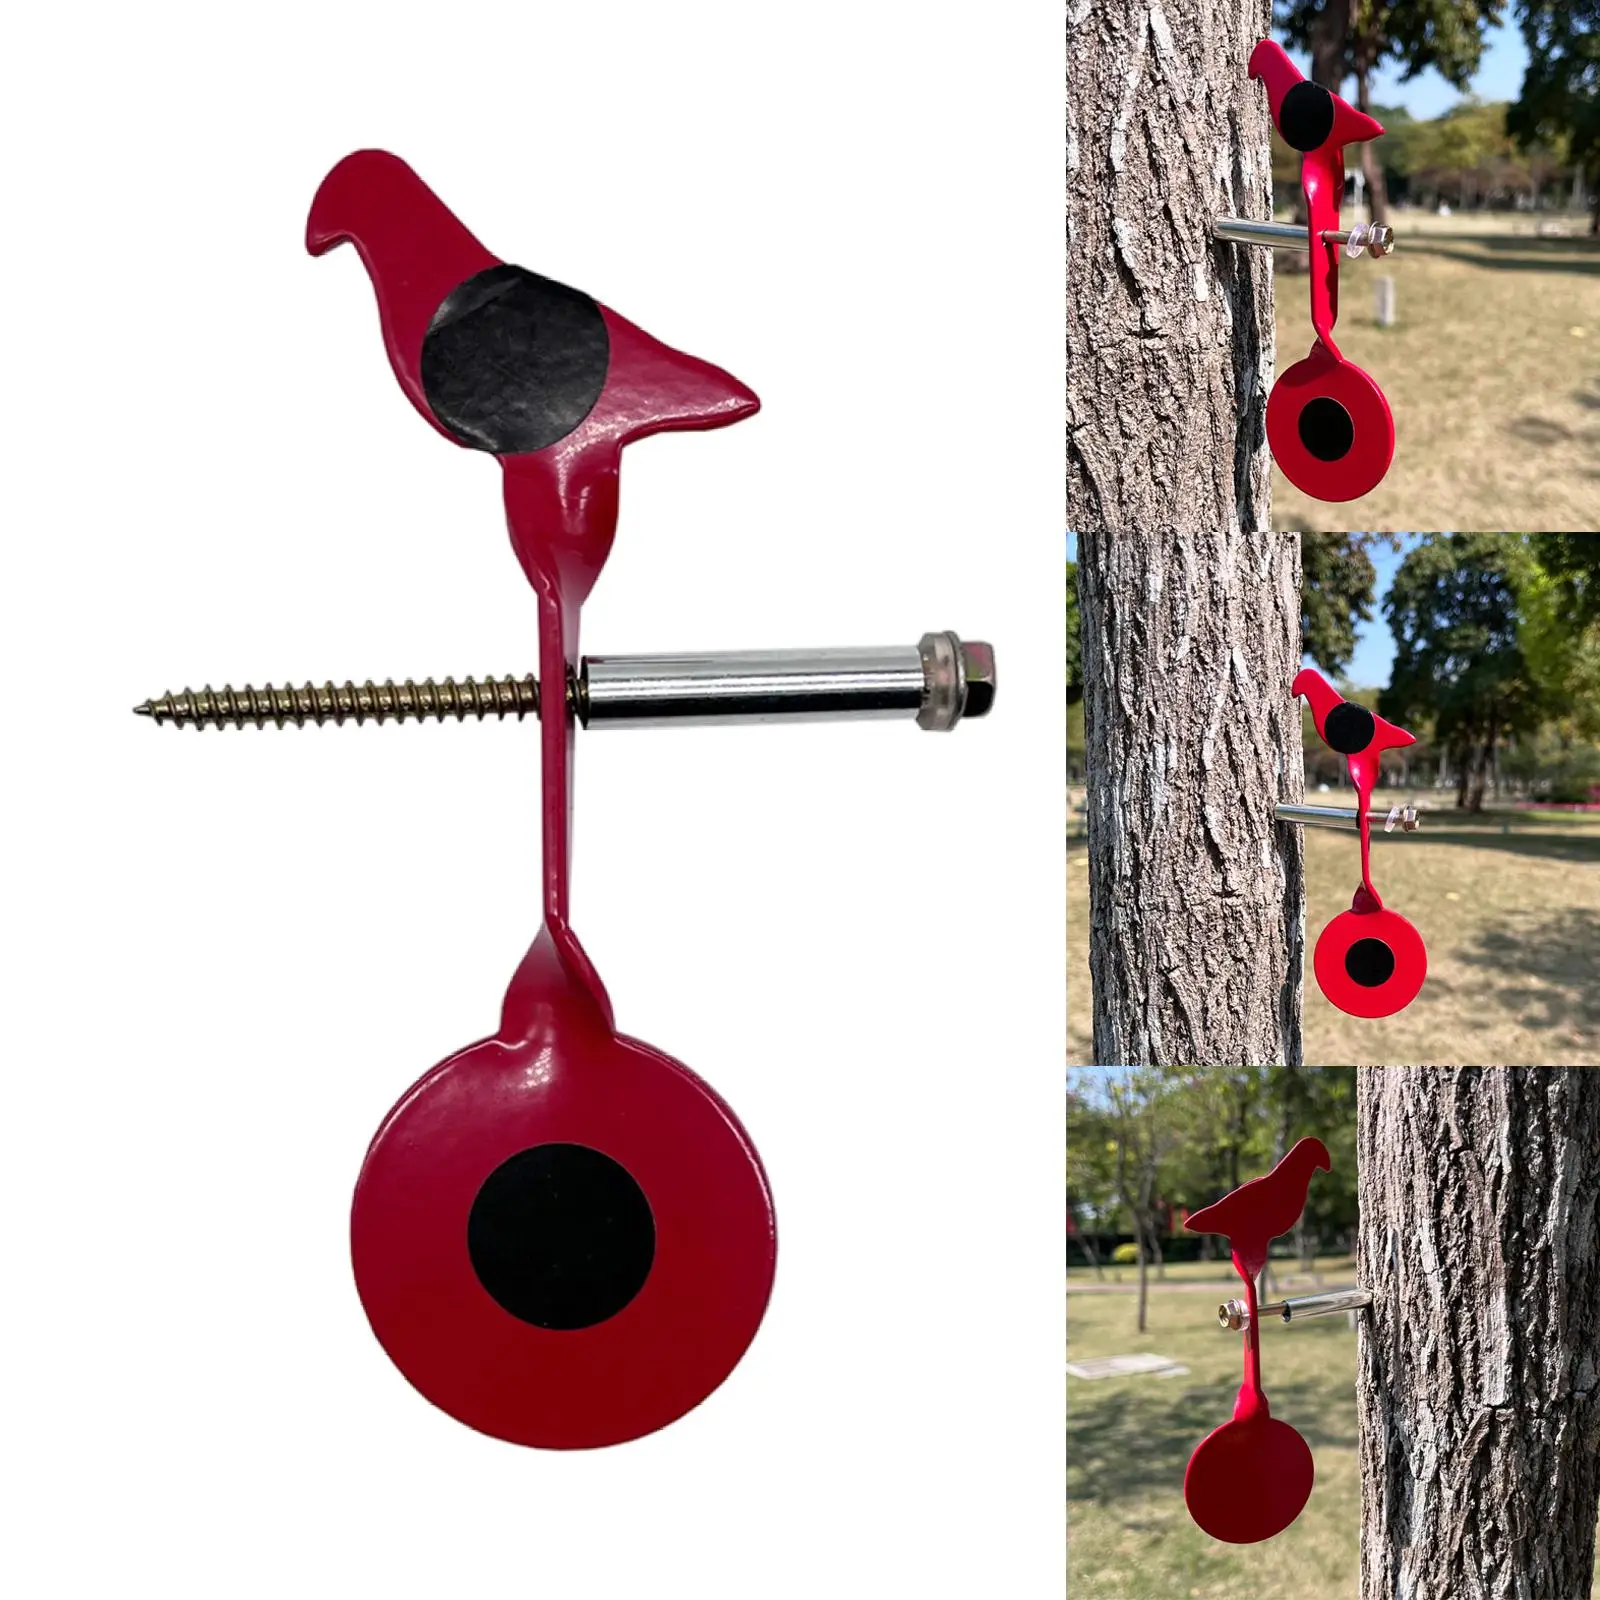 Shooting Target Plates Spinner Tree Wall Fixed Garden Backyard Resetting Target for Hunting